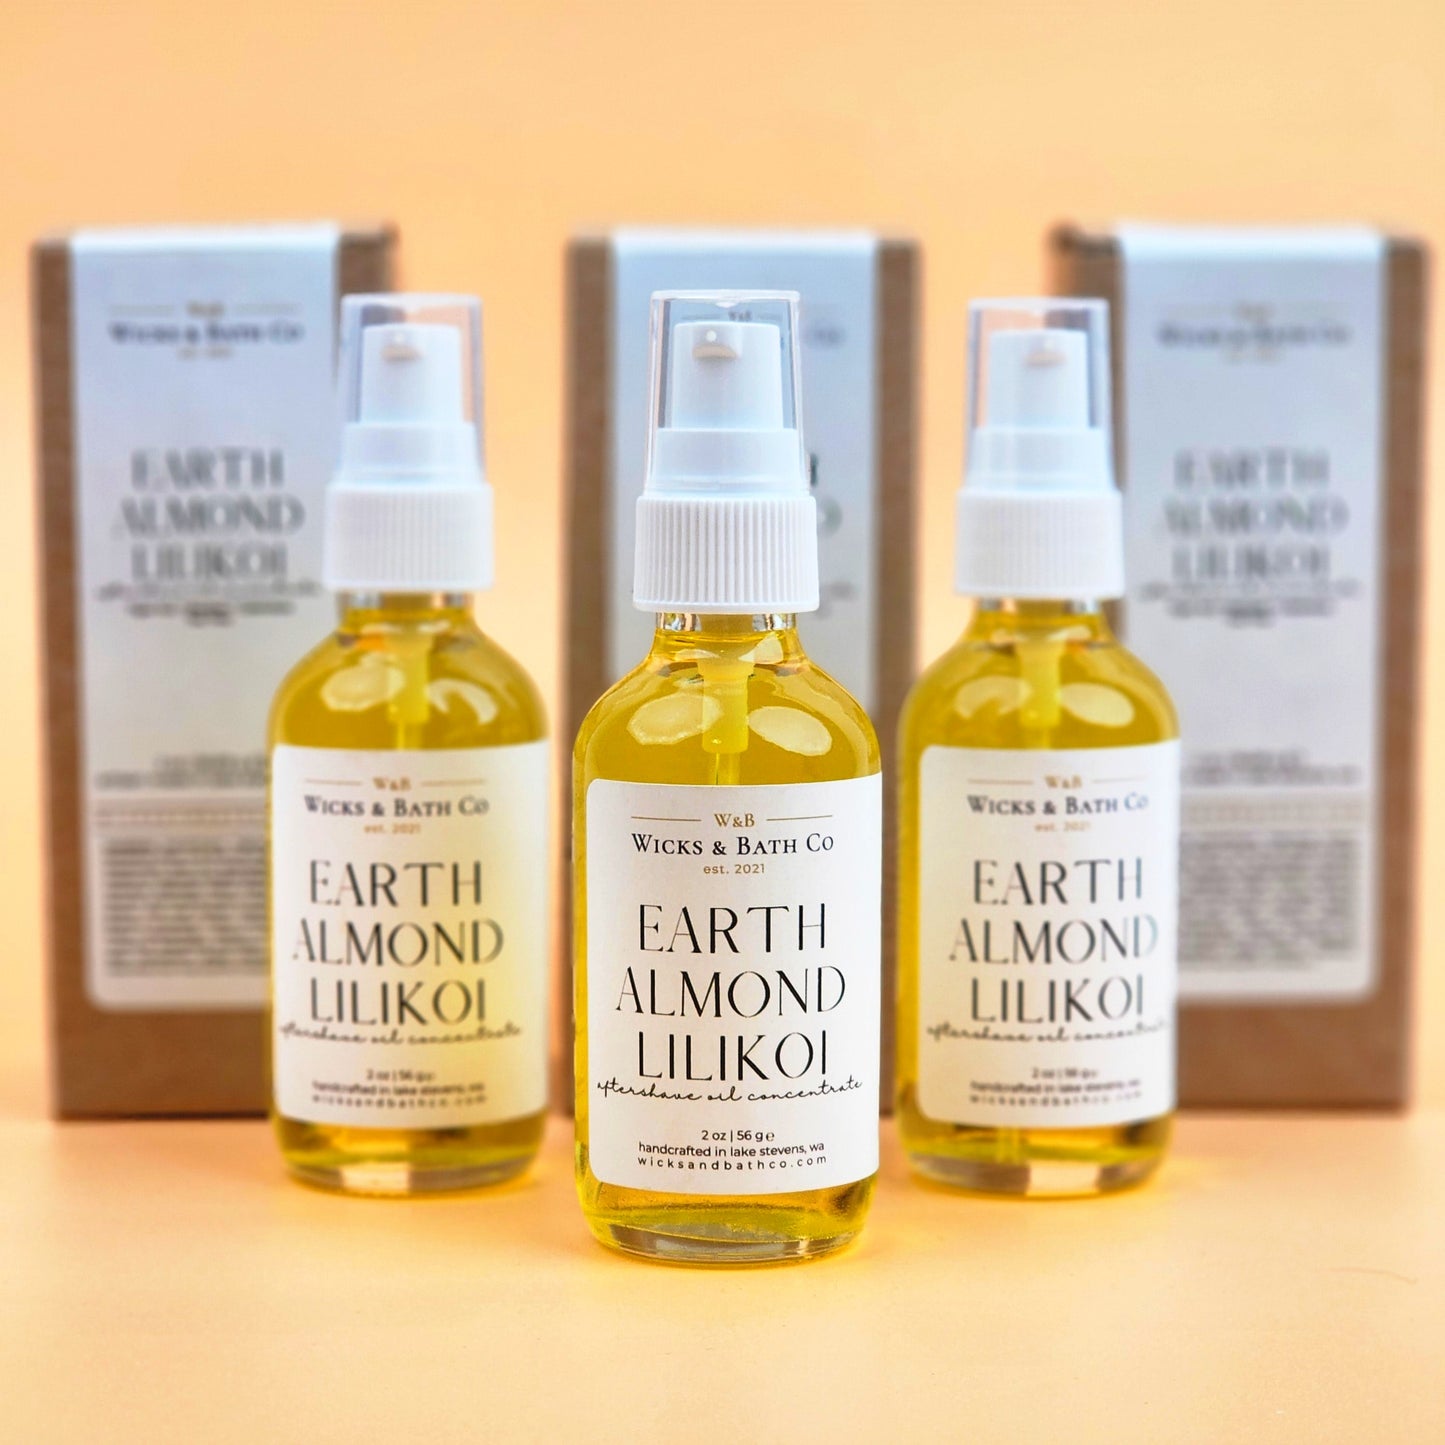 EARTH ALMOND + LILIKOI Aftershave Oil Concentrate - Wicks and Bath Co.